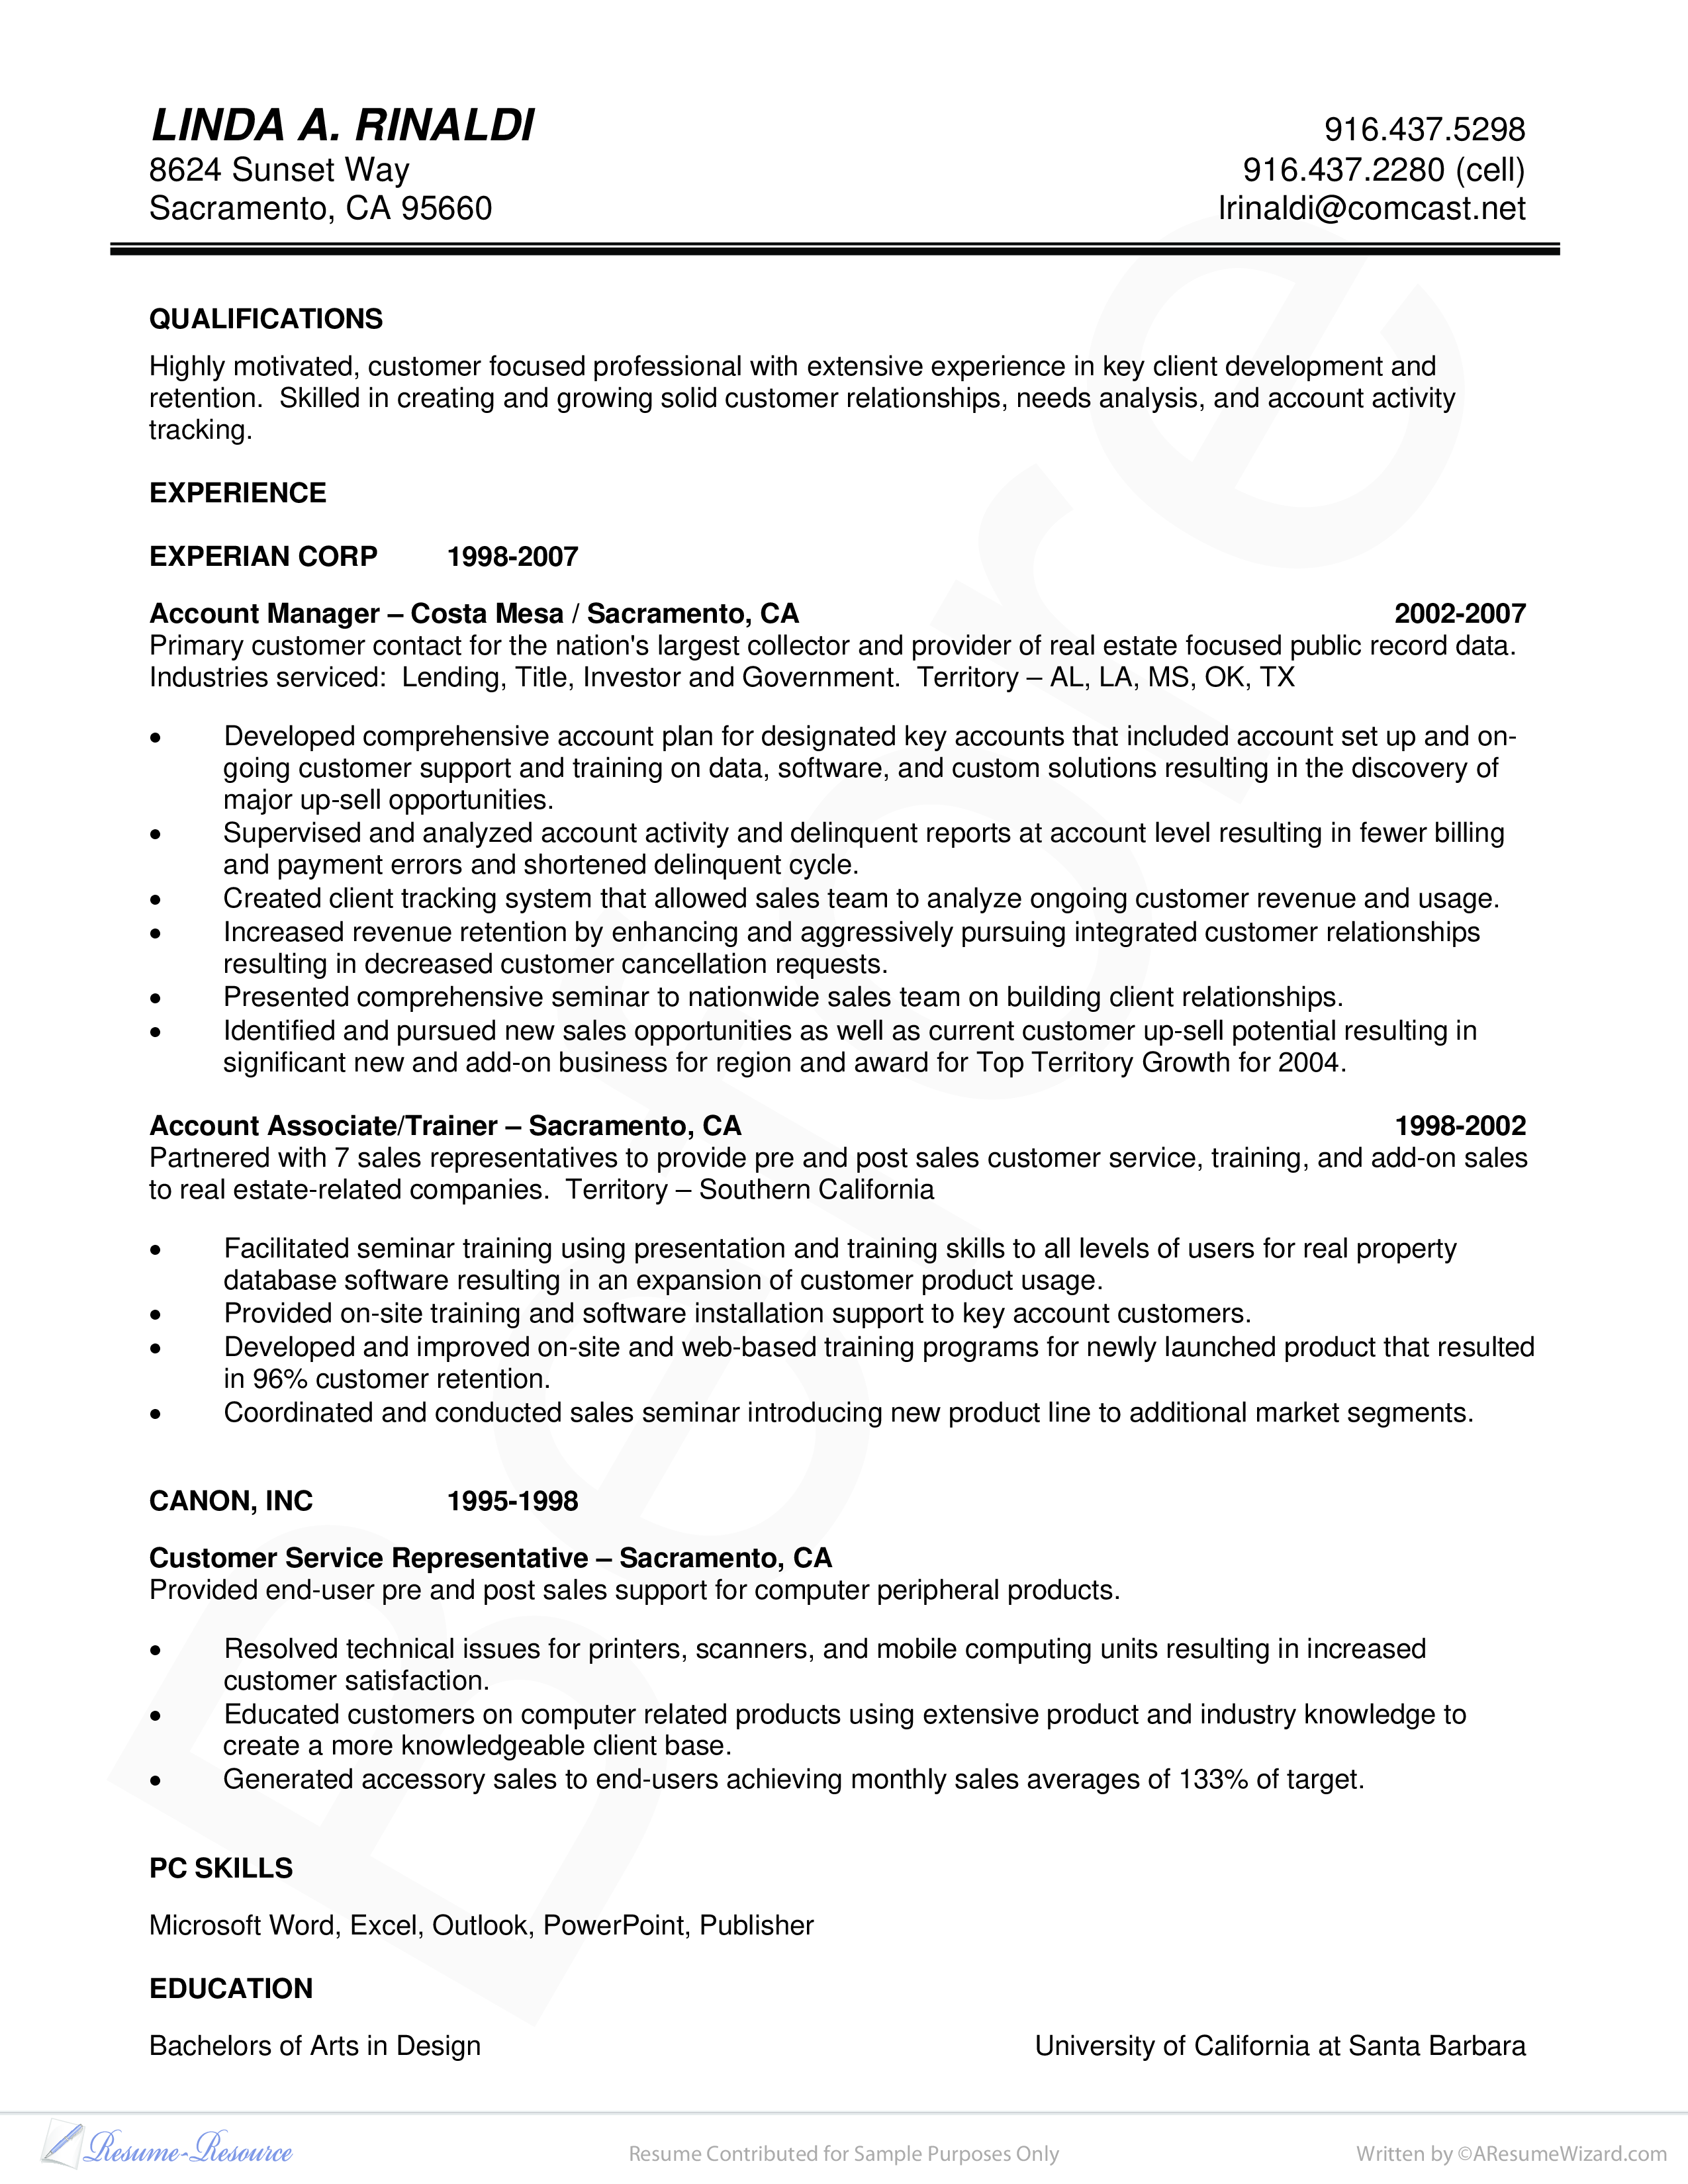 Account Management Resume Templates at